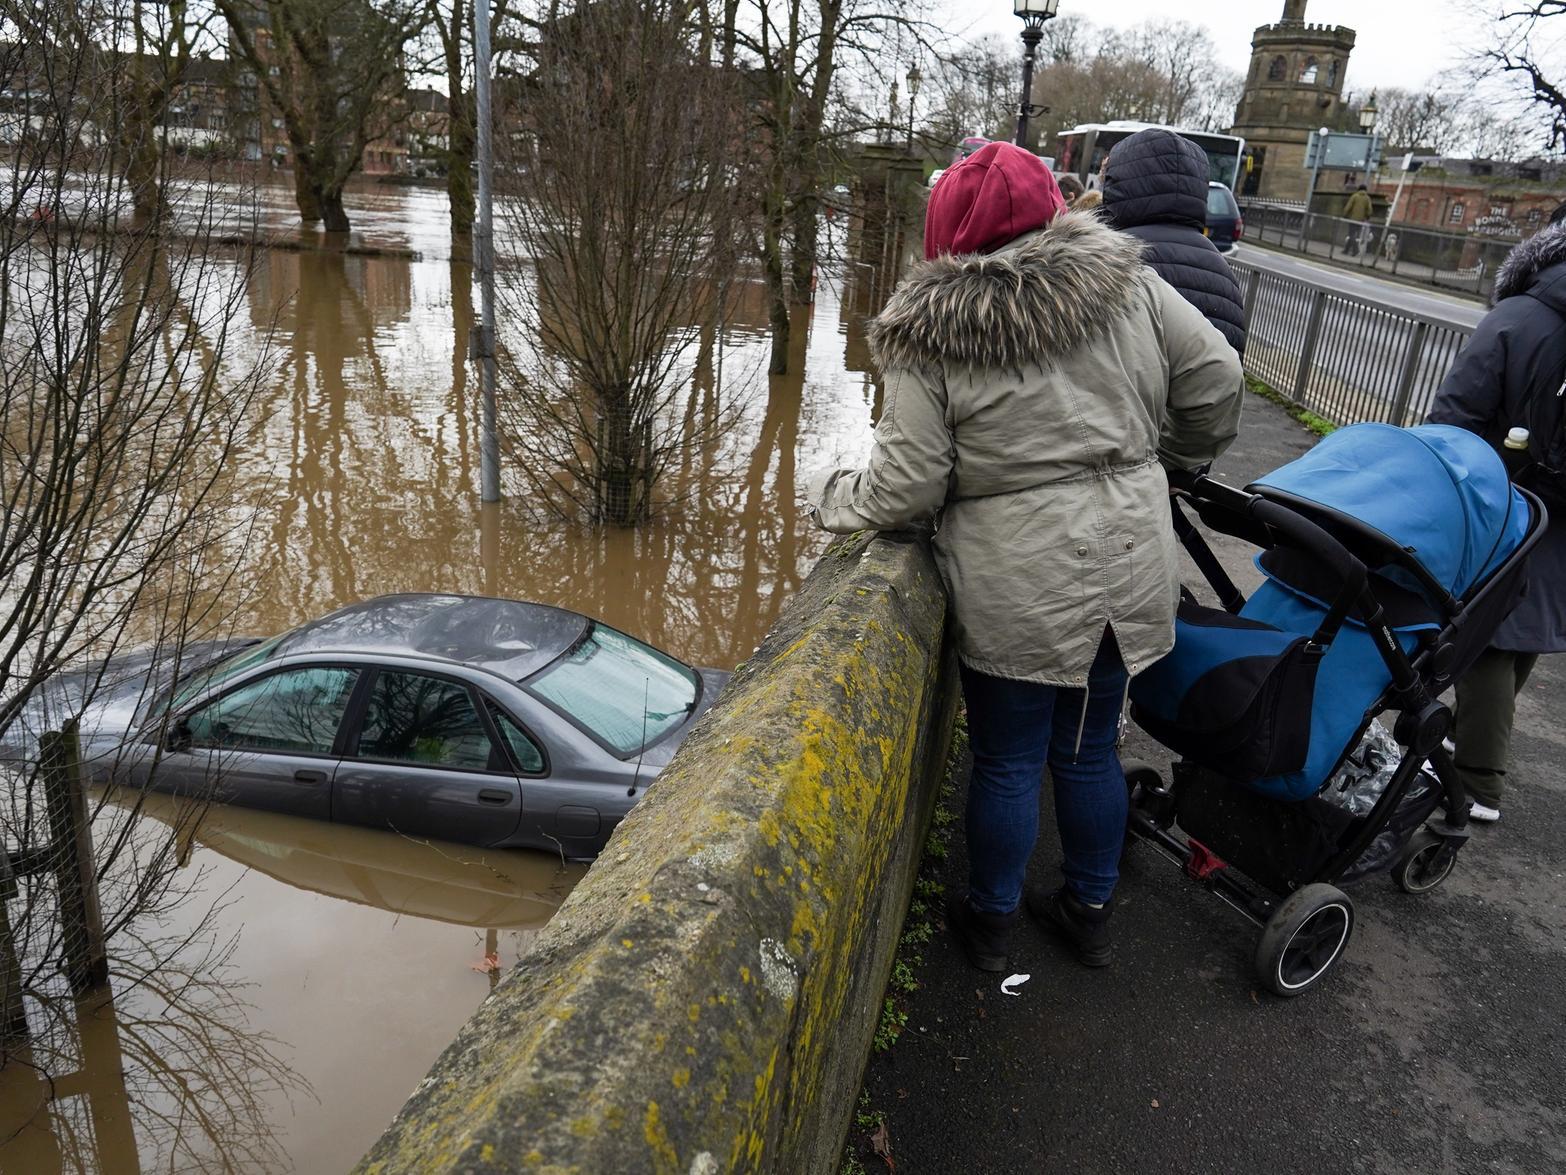 Passers by look over at an abandoned car in a flooded car park as water levels in the River Ouse in York. Photo credit: Ian Forsyth/Getty Images.